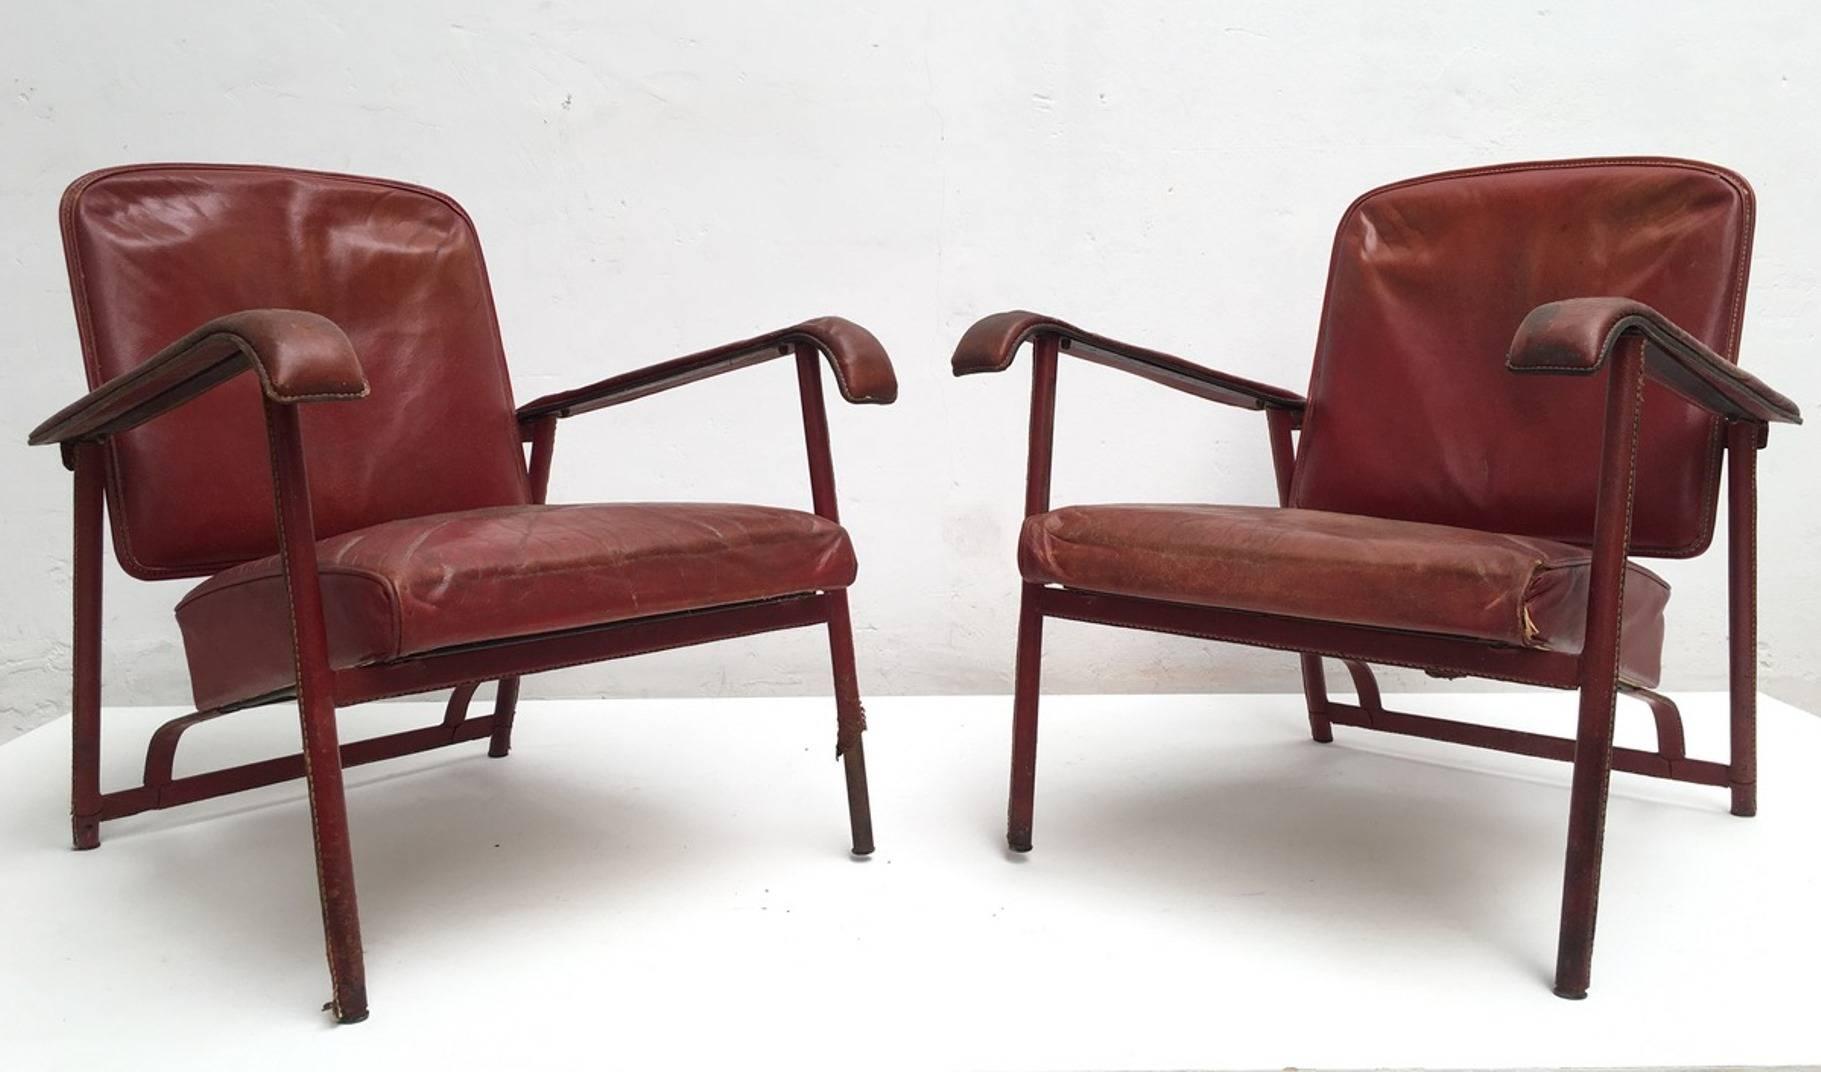 French Rare Pair of Original Vintage Leather Adnet Lounge Chairs France 1950's